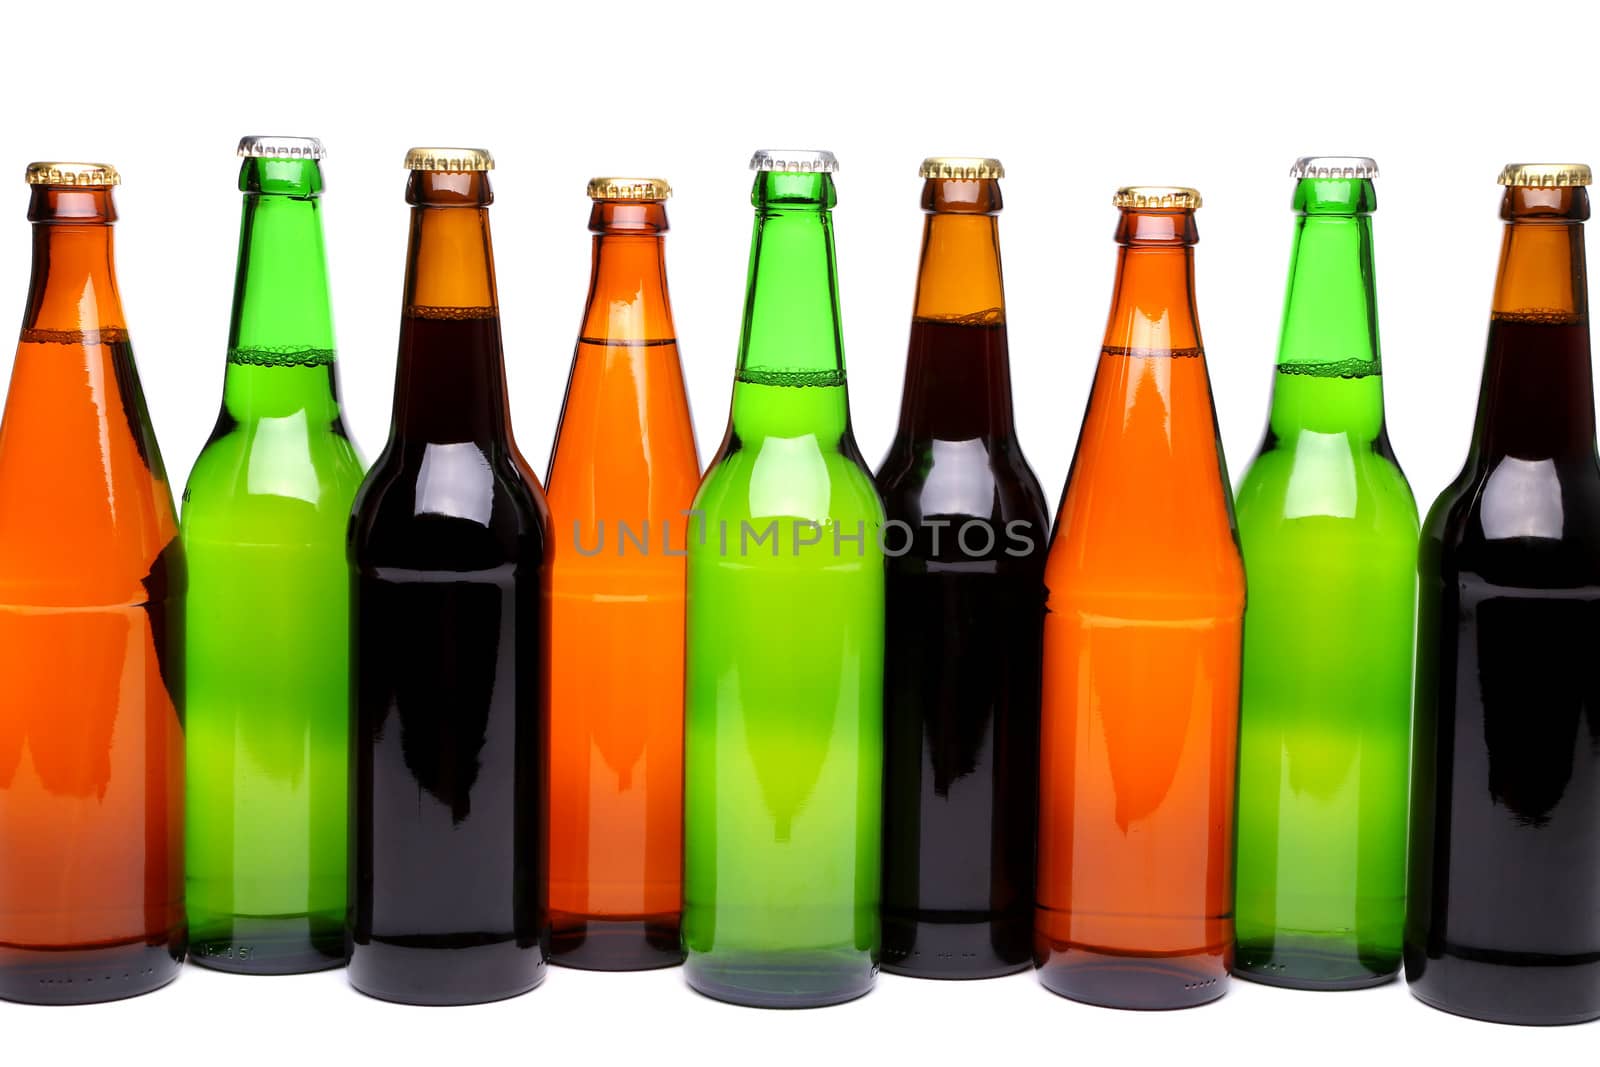 A row of six beer bottles on a white background with a reflection.